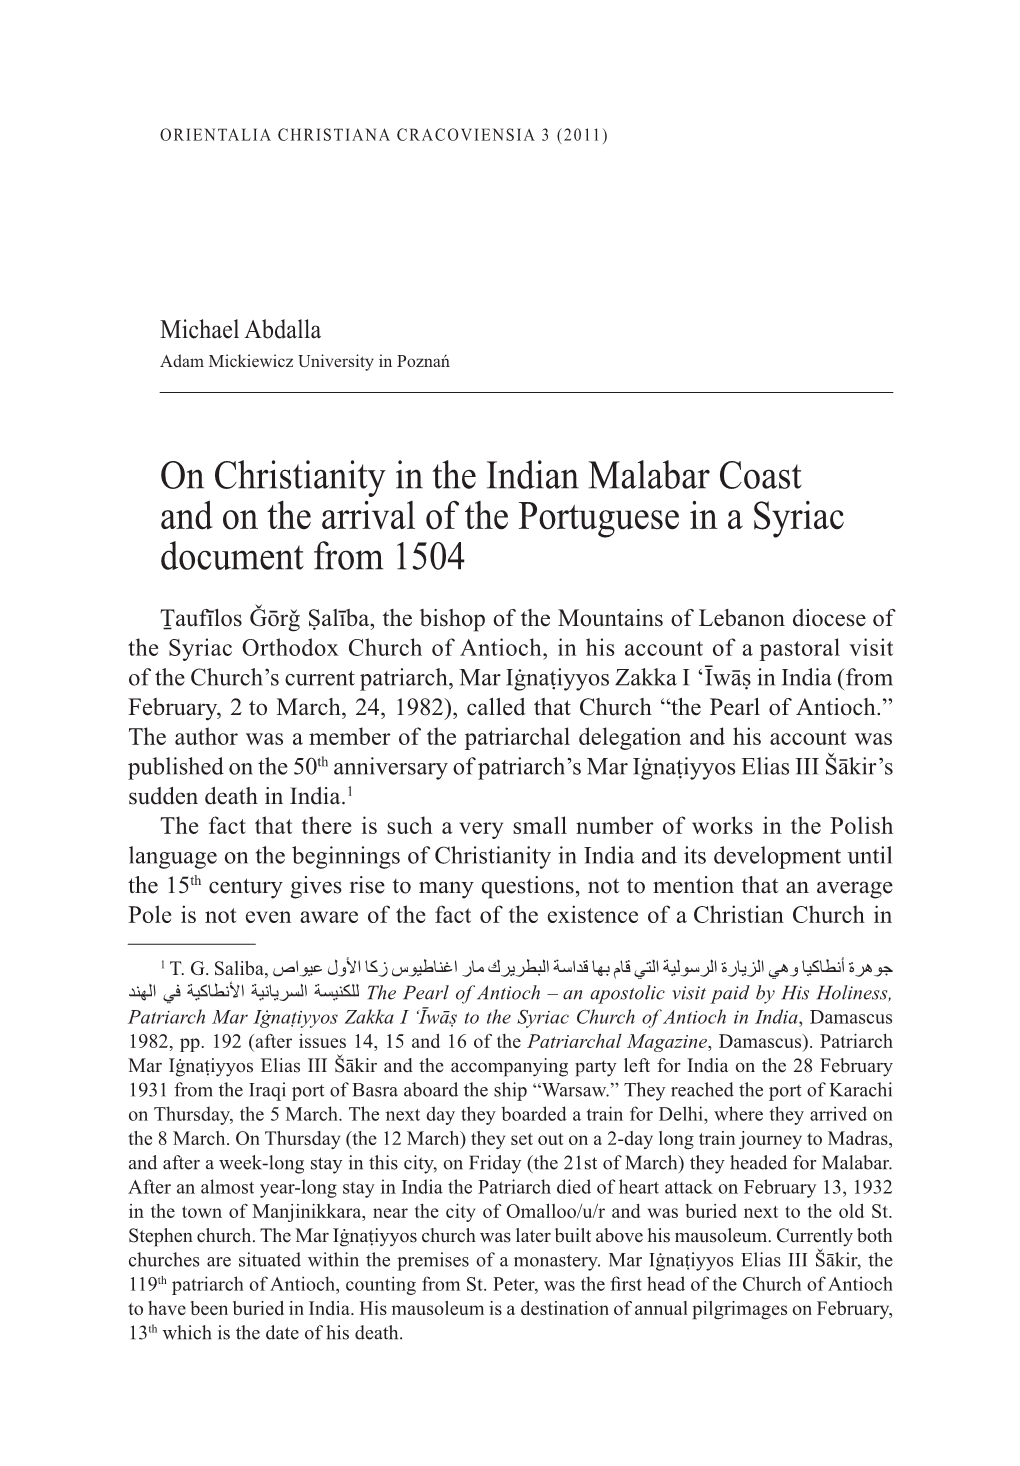 On Christianity in the Indian Malabar Coast and on the Arrival of the Portuguese in a Syriac Document from 1504